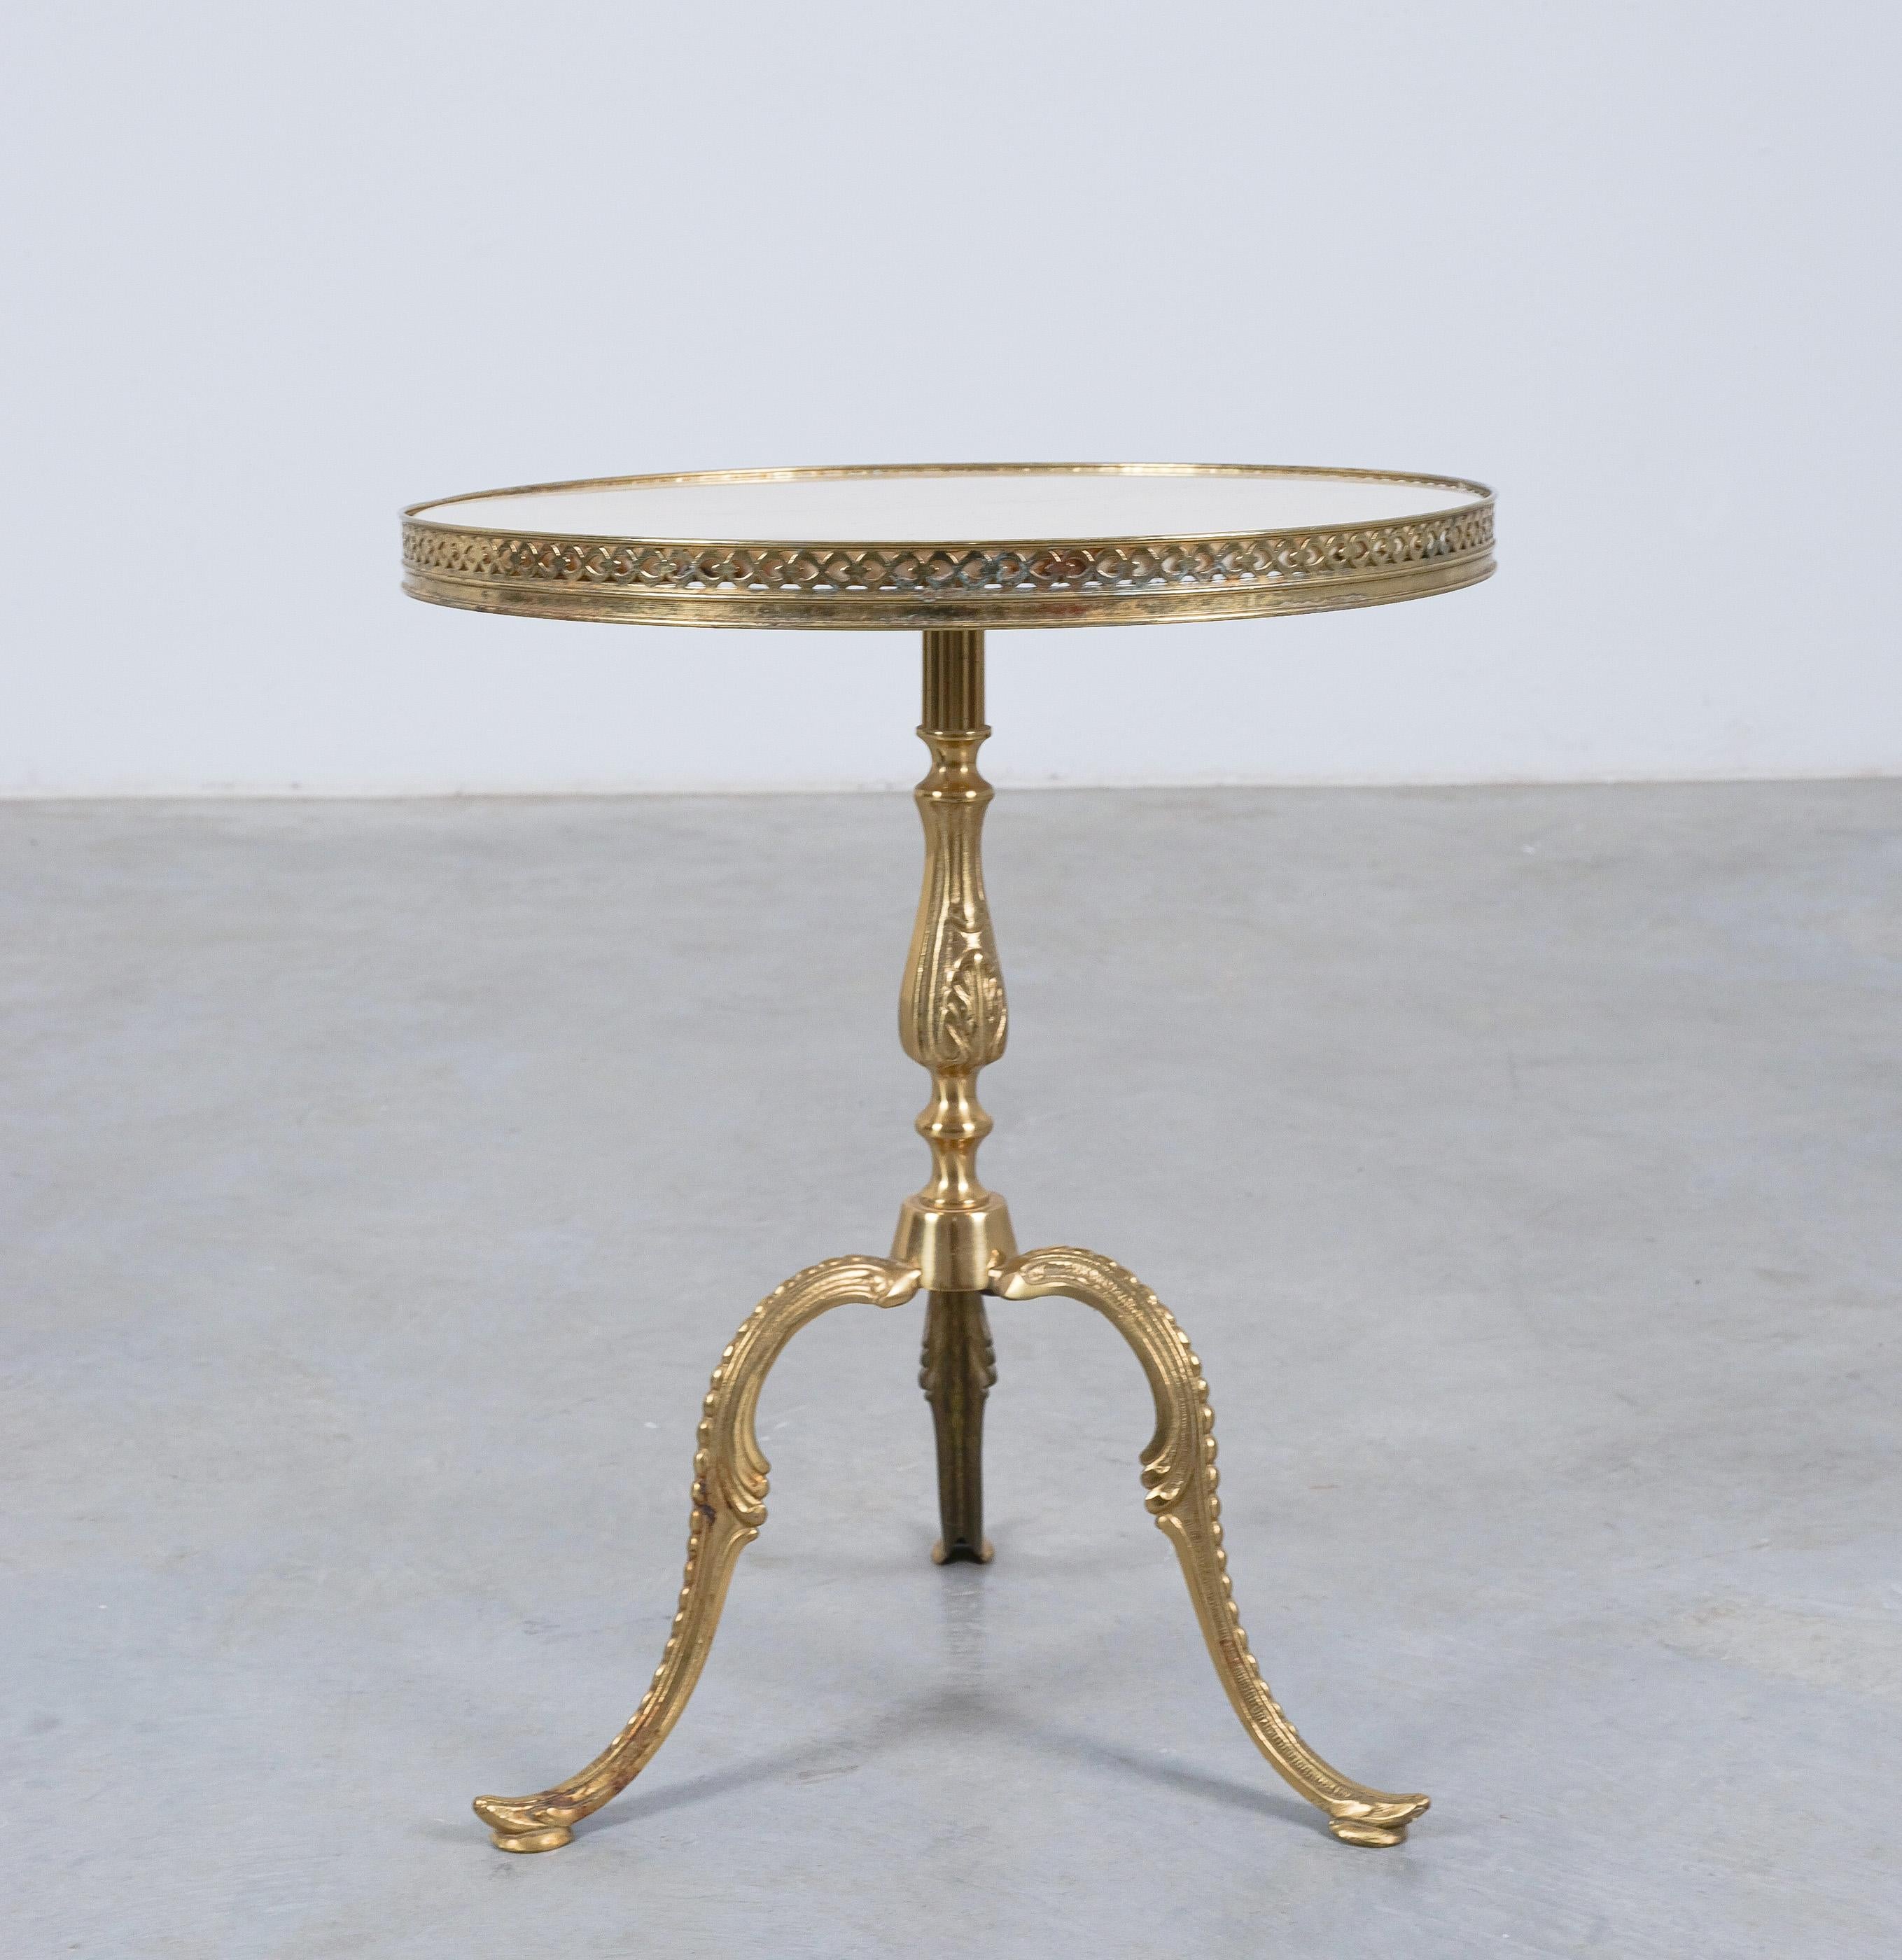 Side Table White Marble Top Brass, France, circa 1940

Side table in original vintage mid century condition. The neoclassical brass base shows some playful motives deriving more from floral art-nouveau inspiration. It's quite an eclectic piece with